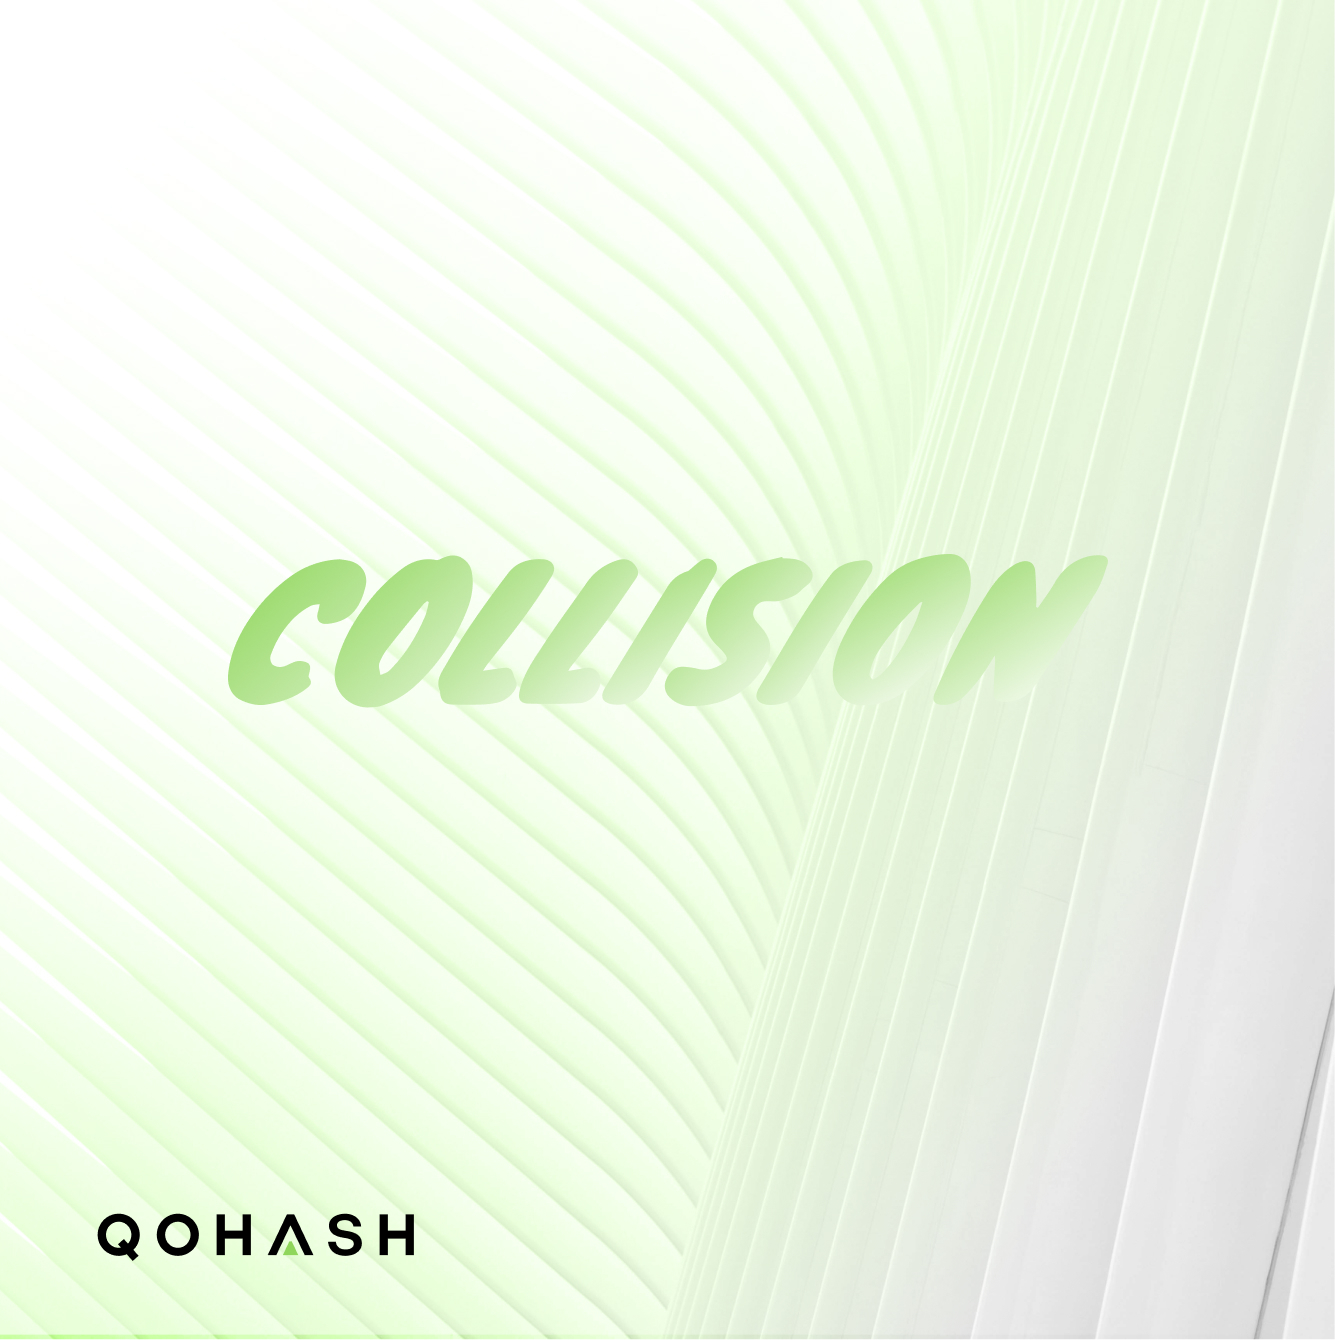 Collision Conference 2020 June 23-25 2020 Virtual Meet